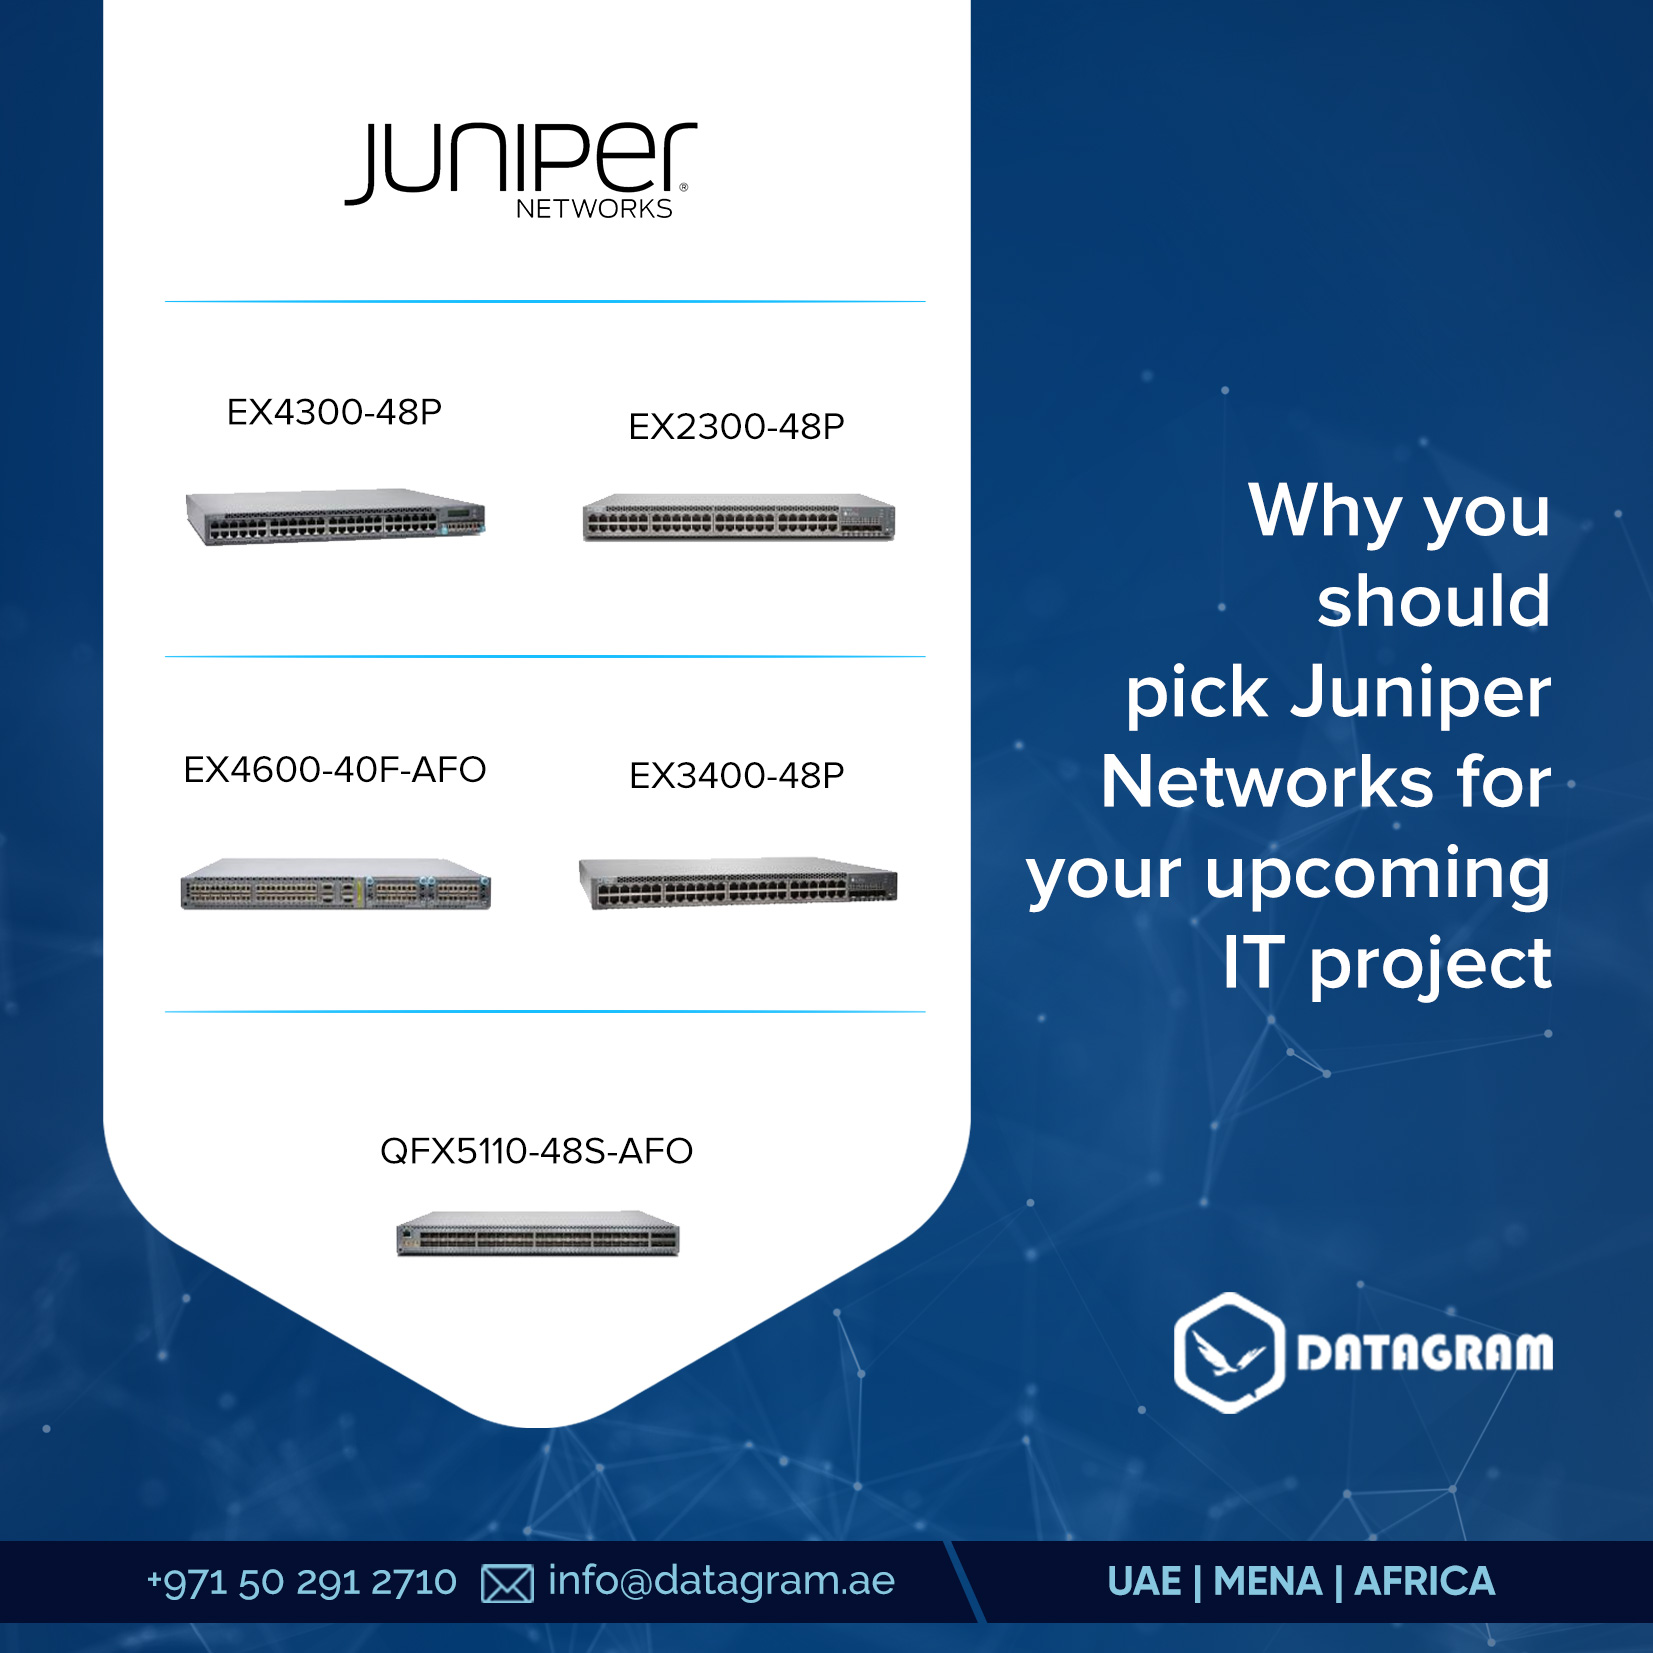 Why you should pick Juniper Networks for your upcoming IT project